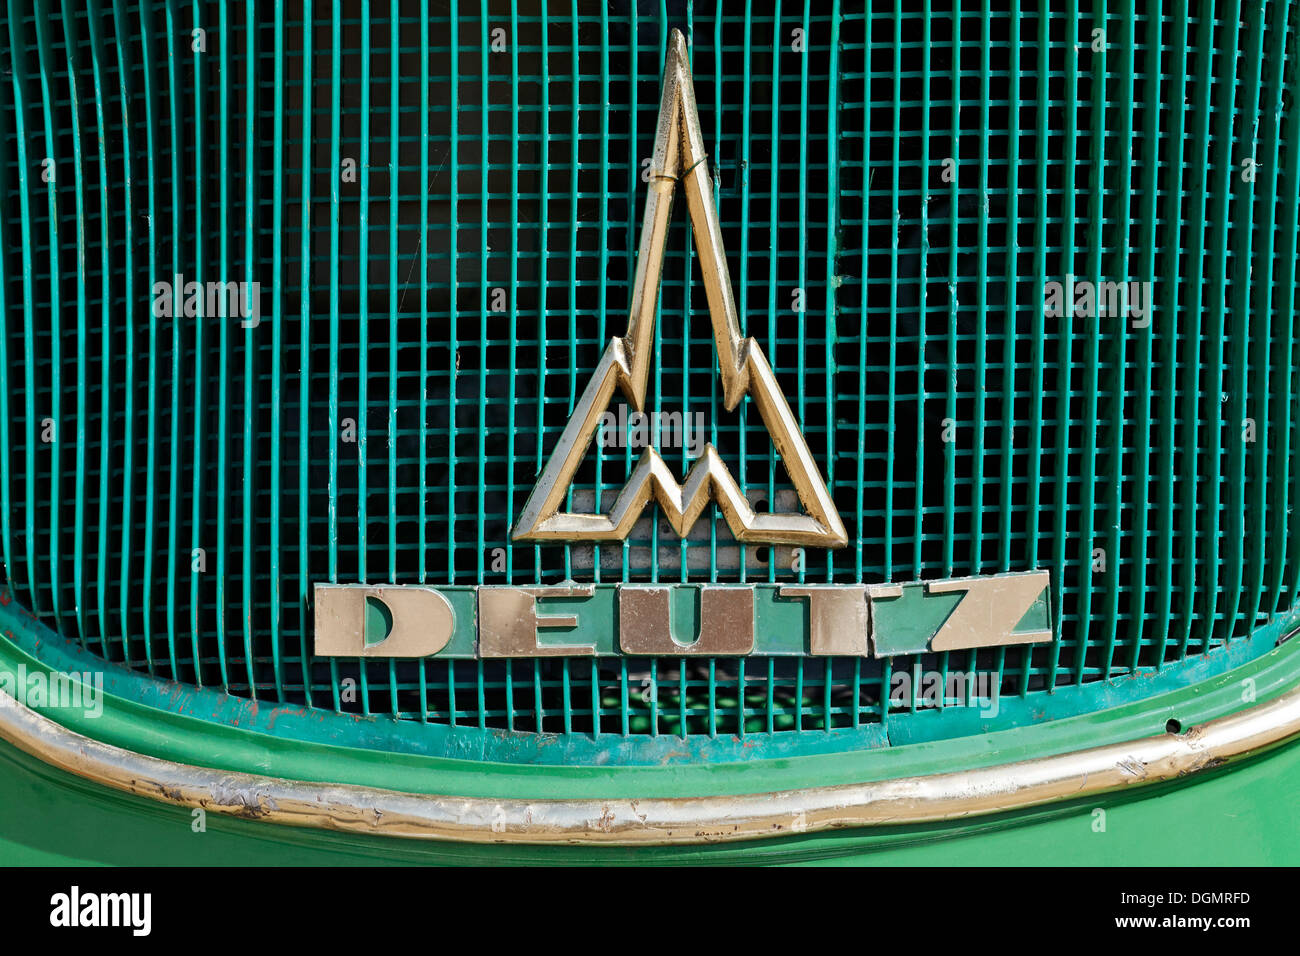 Cooler with the Deutz logo, vintage tractor Stock Photo